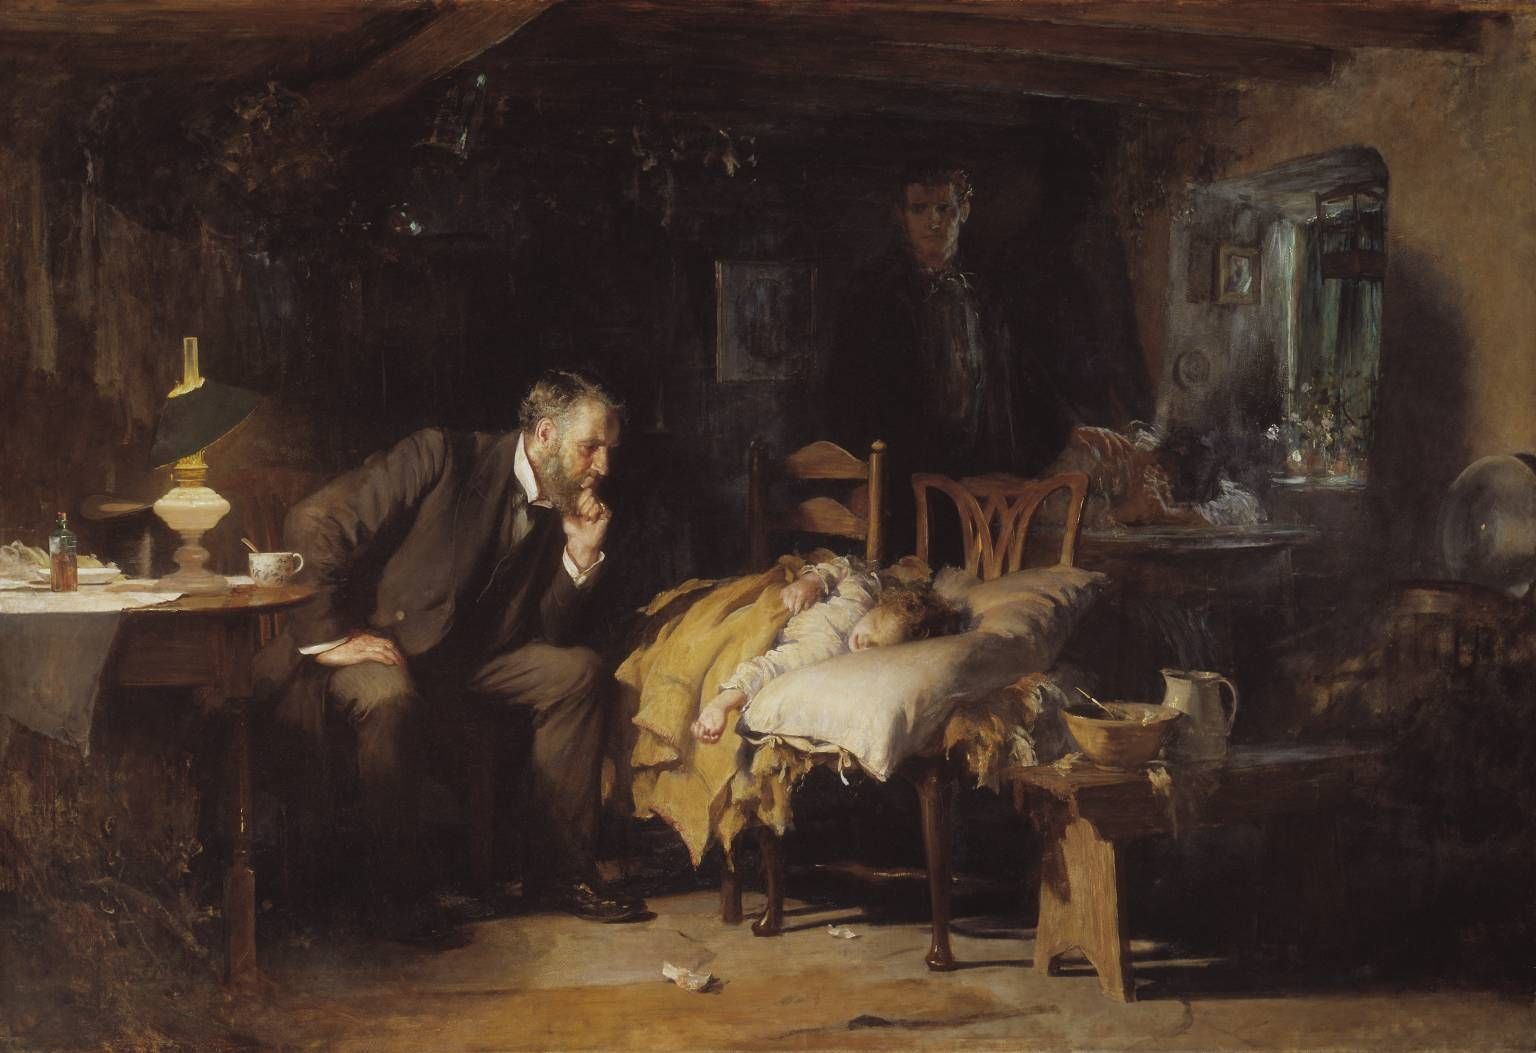 Luke Fildes' 1890 painting of The Doctor